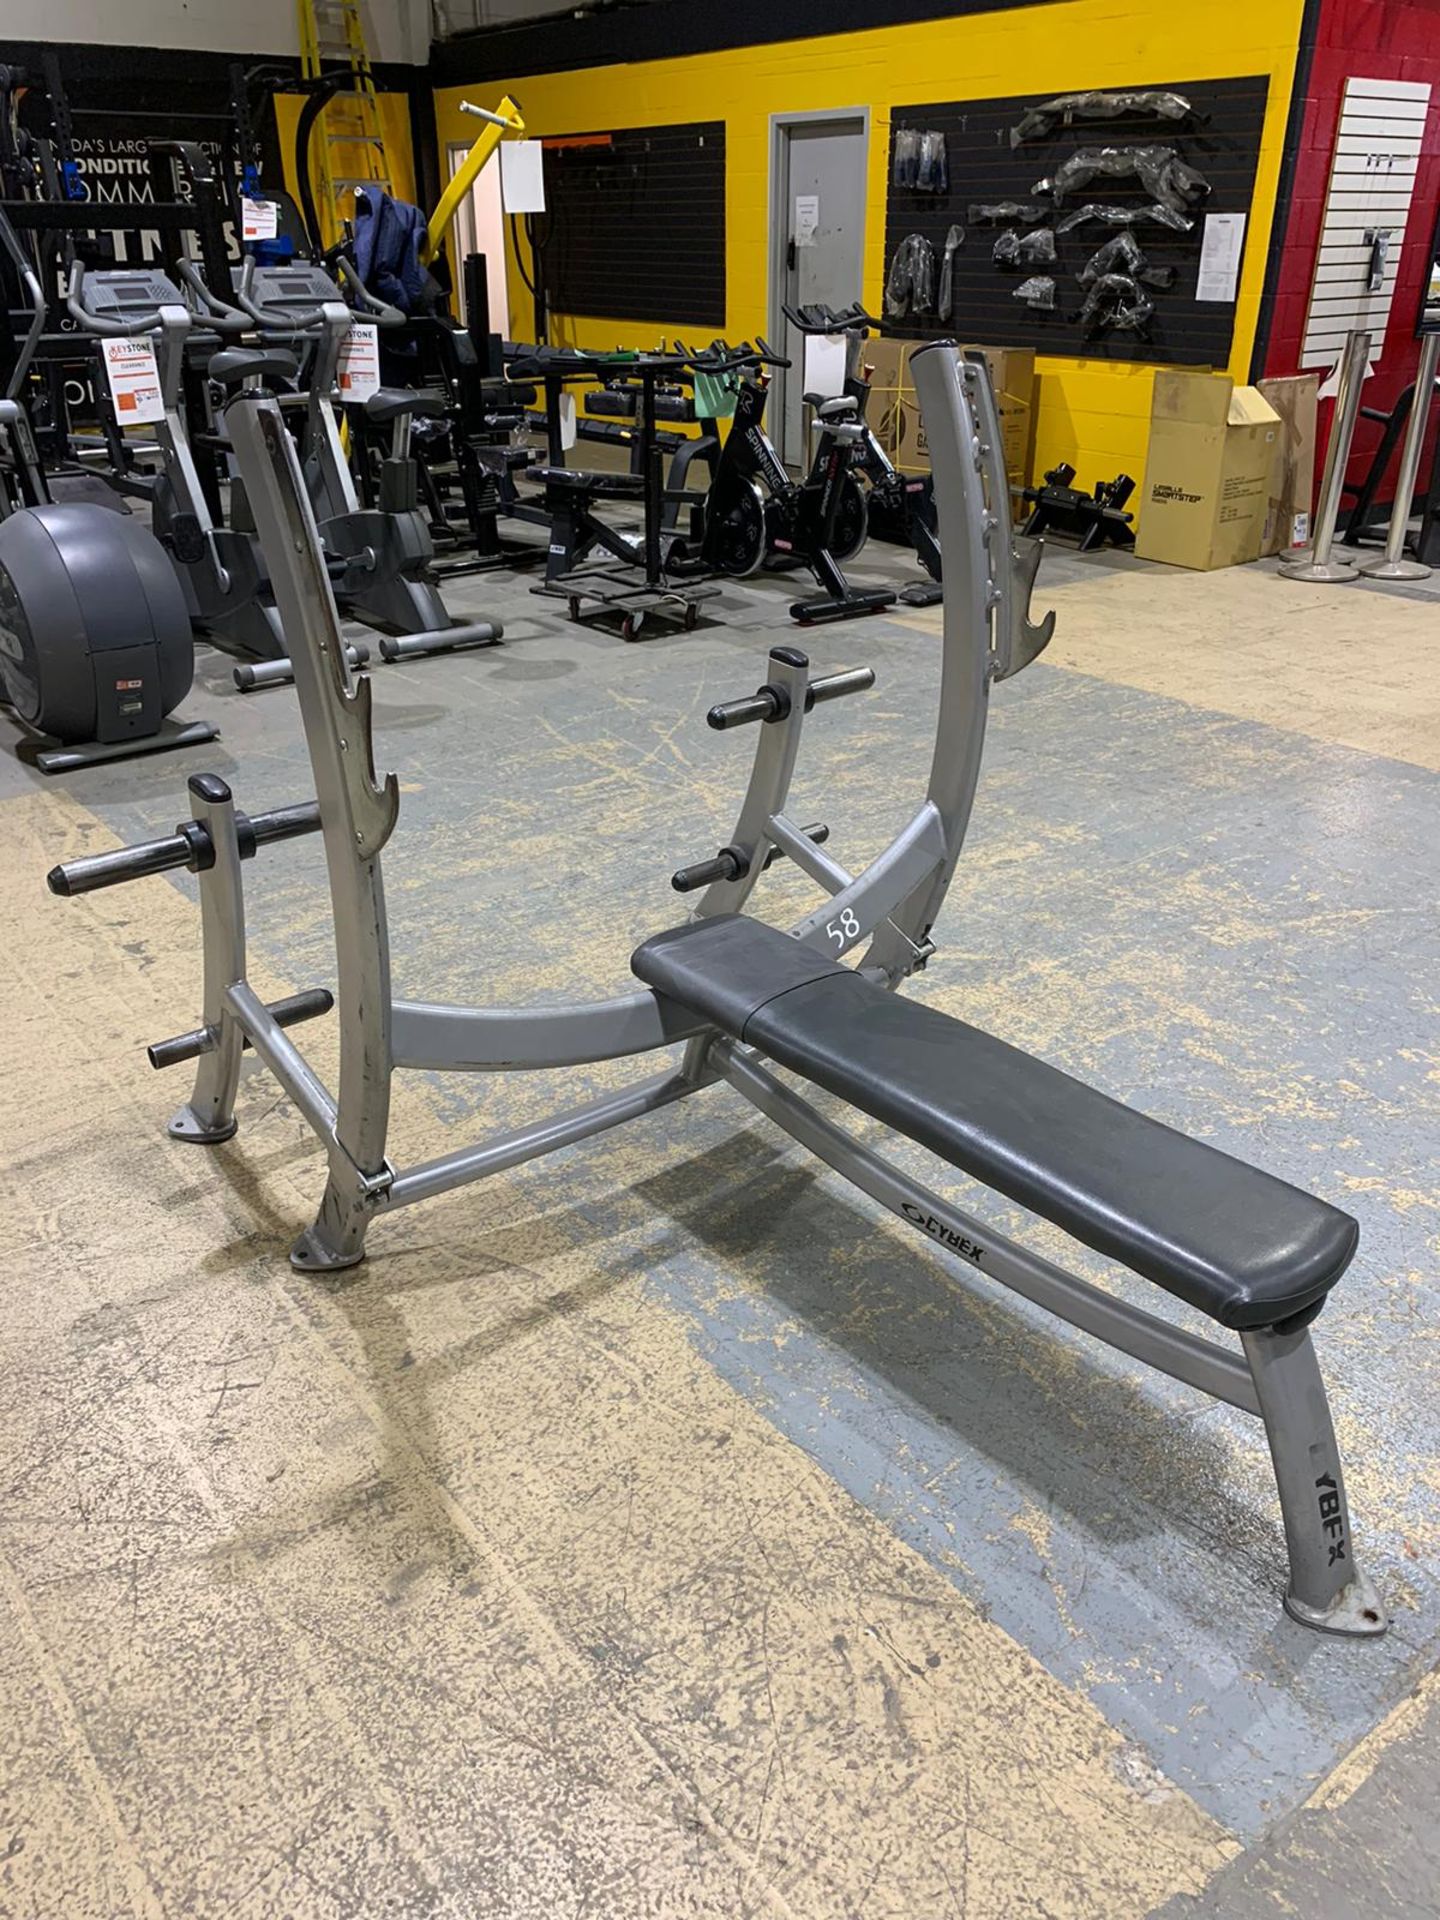 CYBEX OLYMPIC BENCH FLAT BENCH - Image 4 of 4